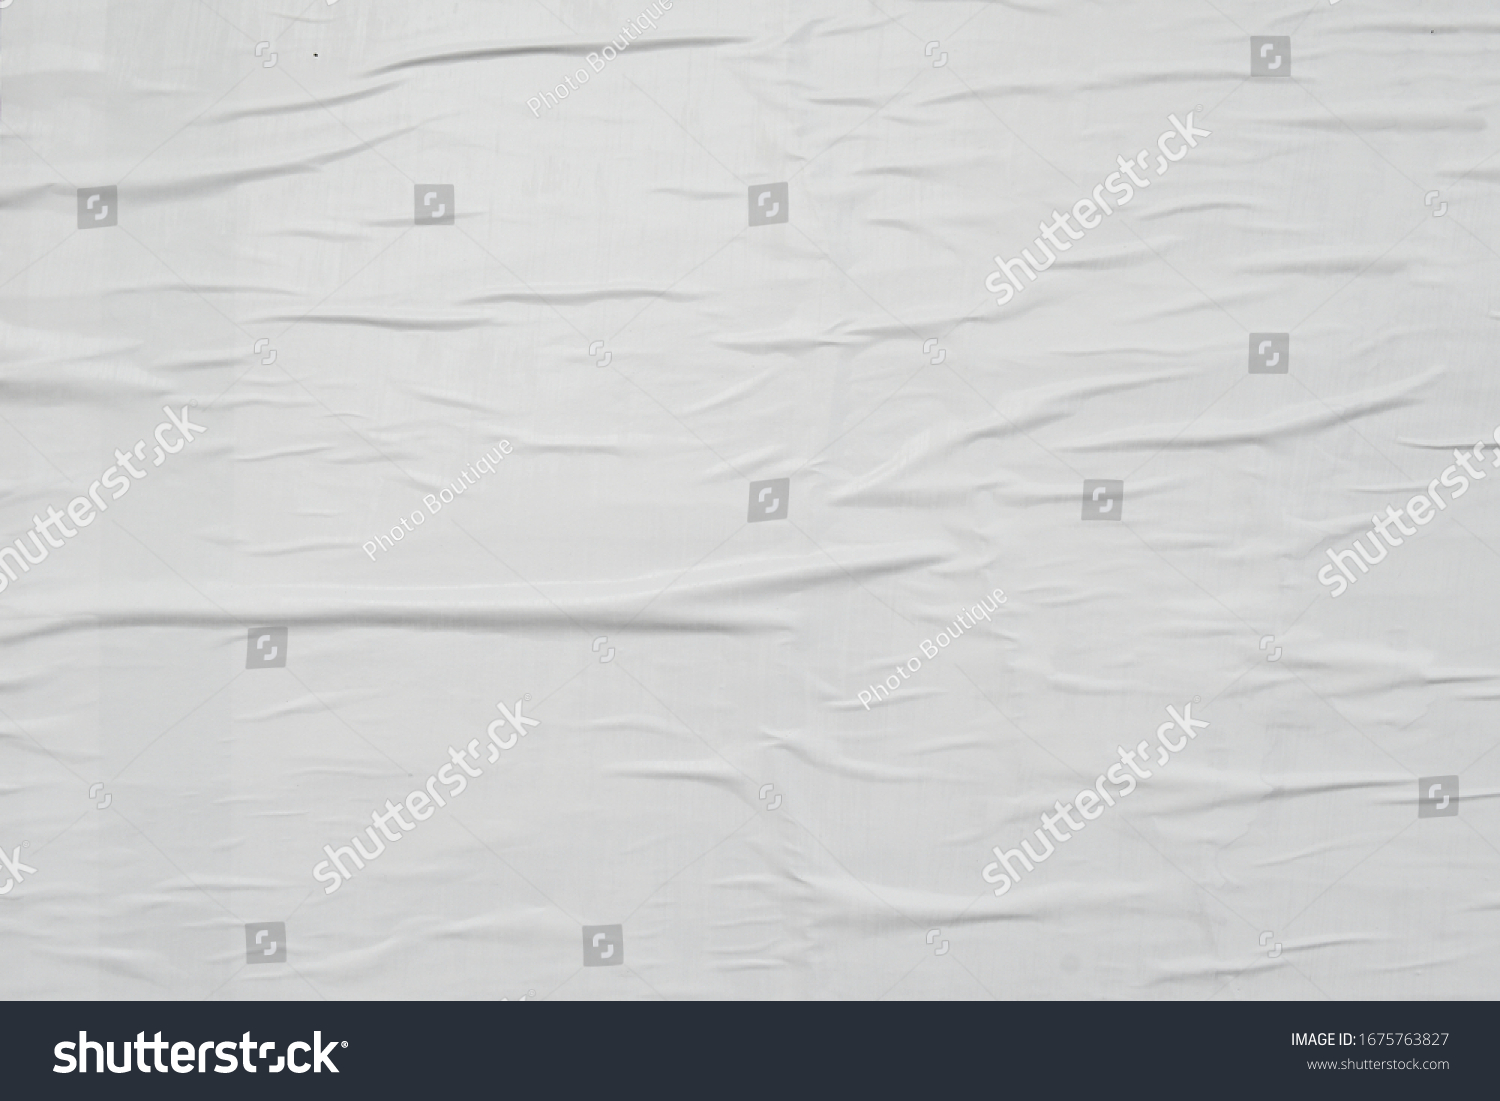 Worn wrinkled creative paper texture background concept, white street poster #1675763827